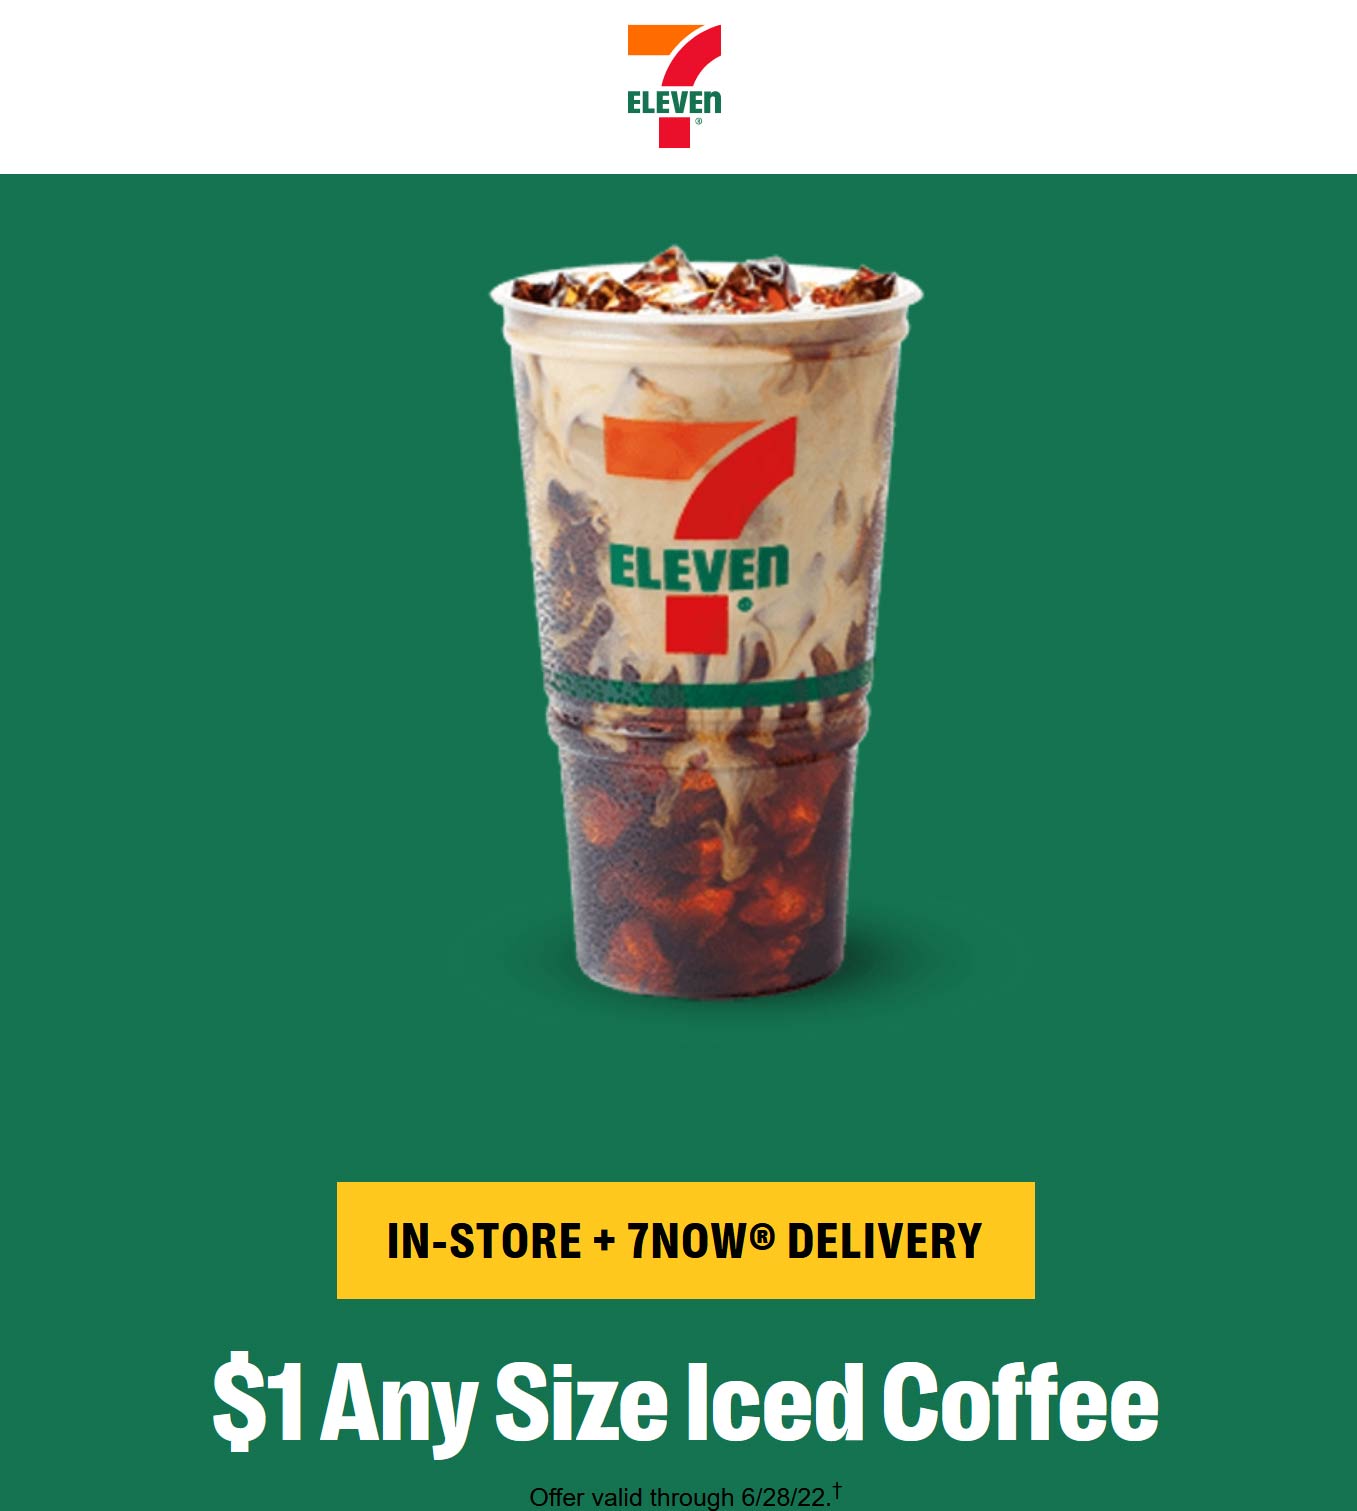 7-Eleven restaurants Coupon  $1 iced coffee at 7-Eleven #7eleven 